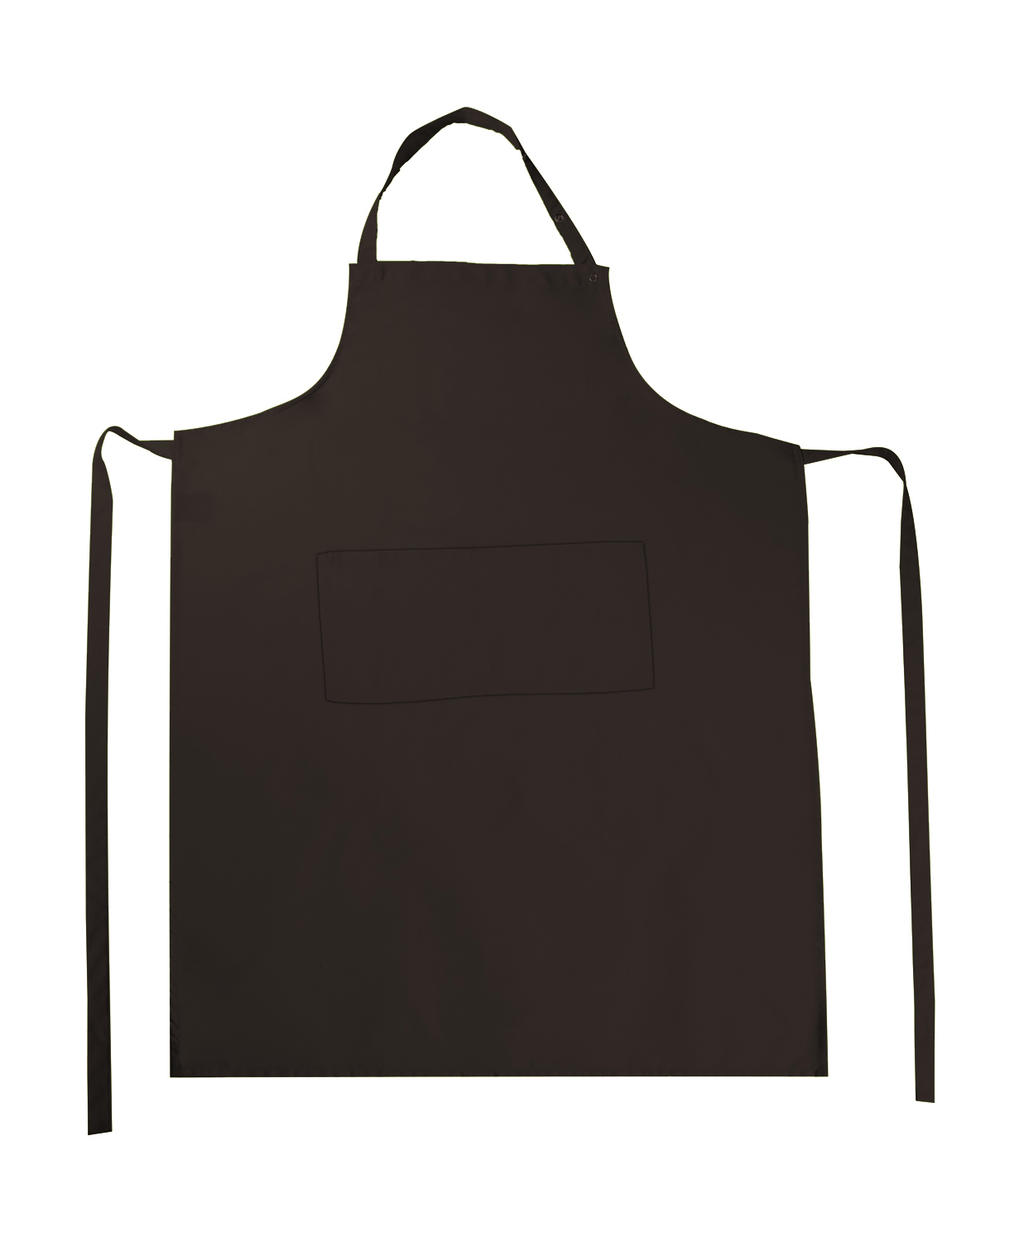  Amsterdam Bib Apron with Pocket in Farbe Brown